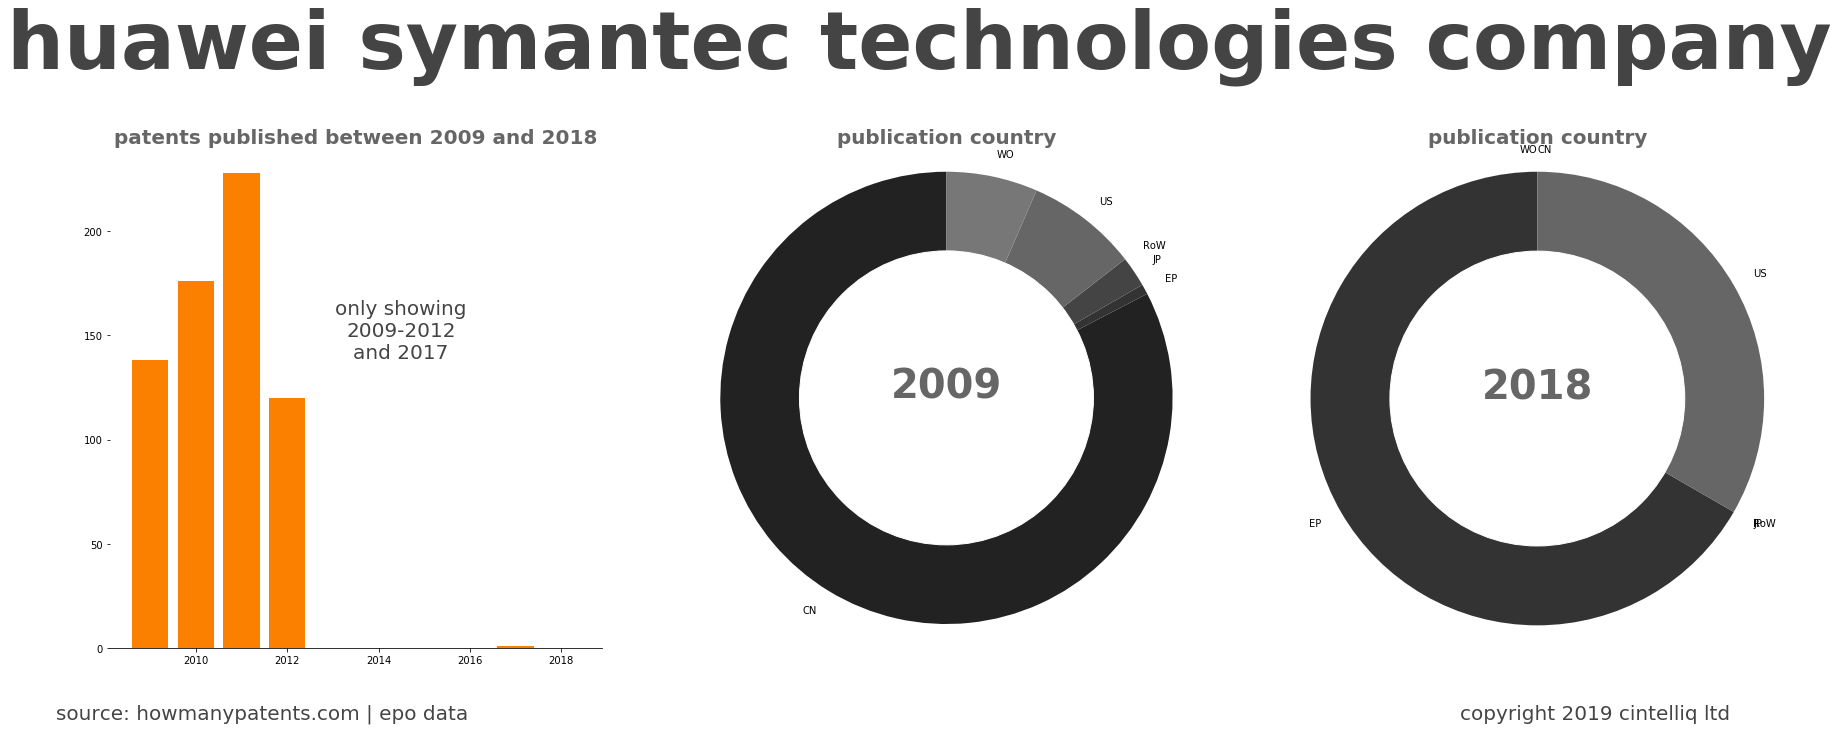 summary of patents for Huawei Symantec Technologies Company